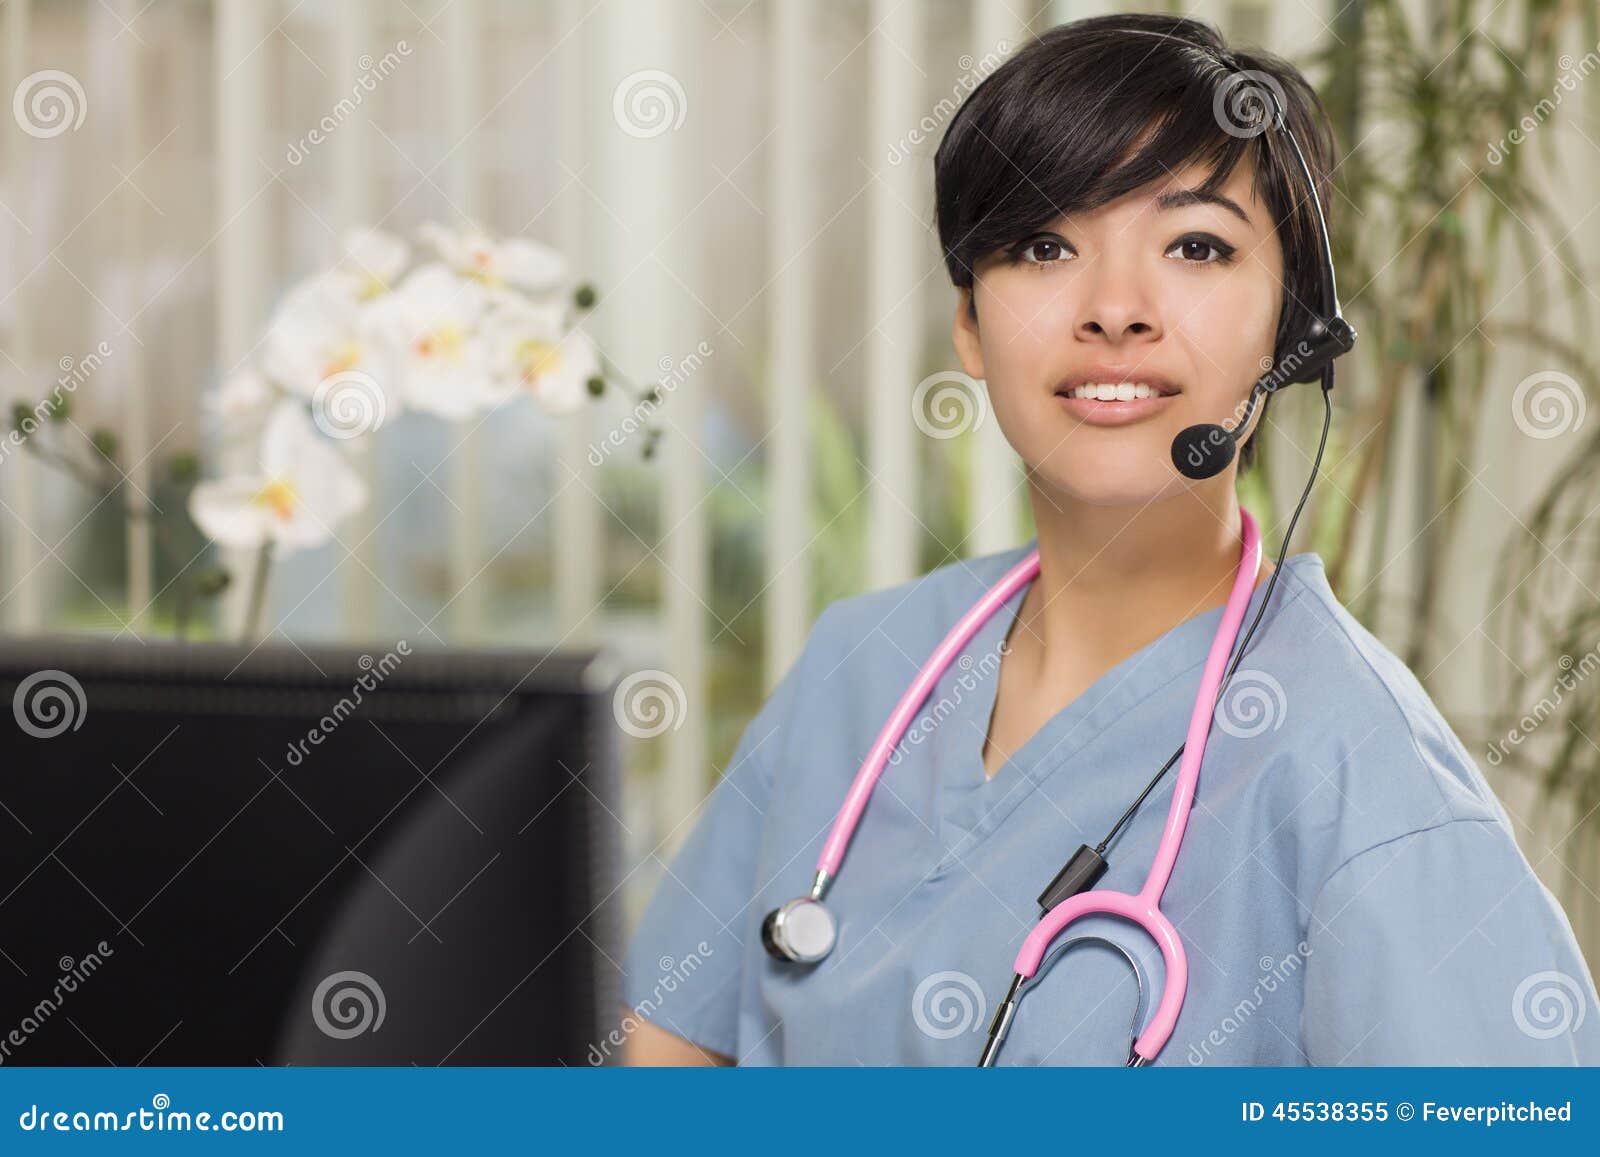 mixed race nurse practitioner or doctor at computer